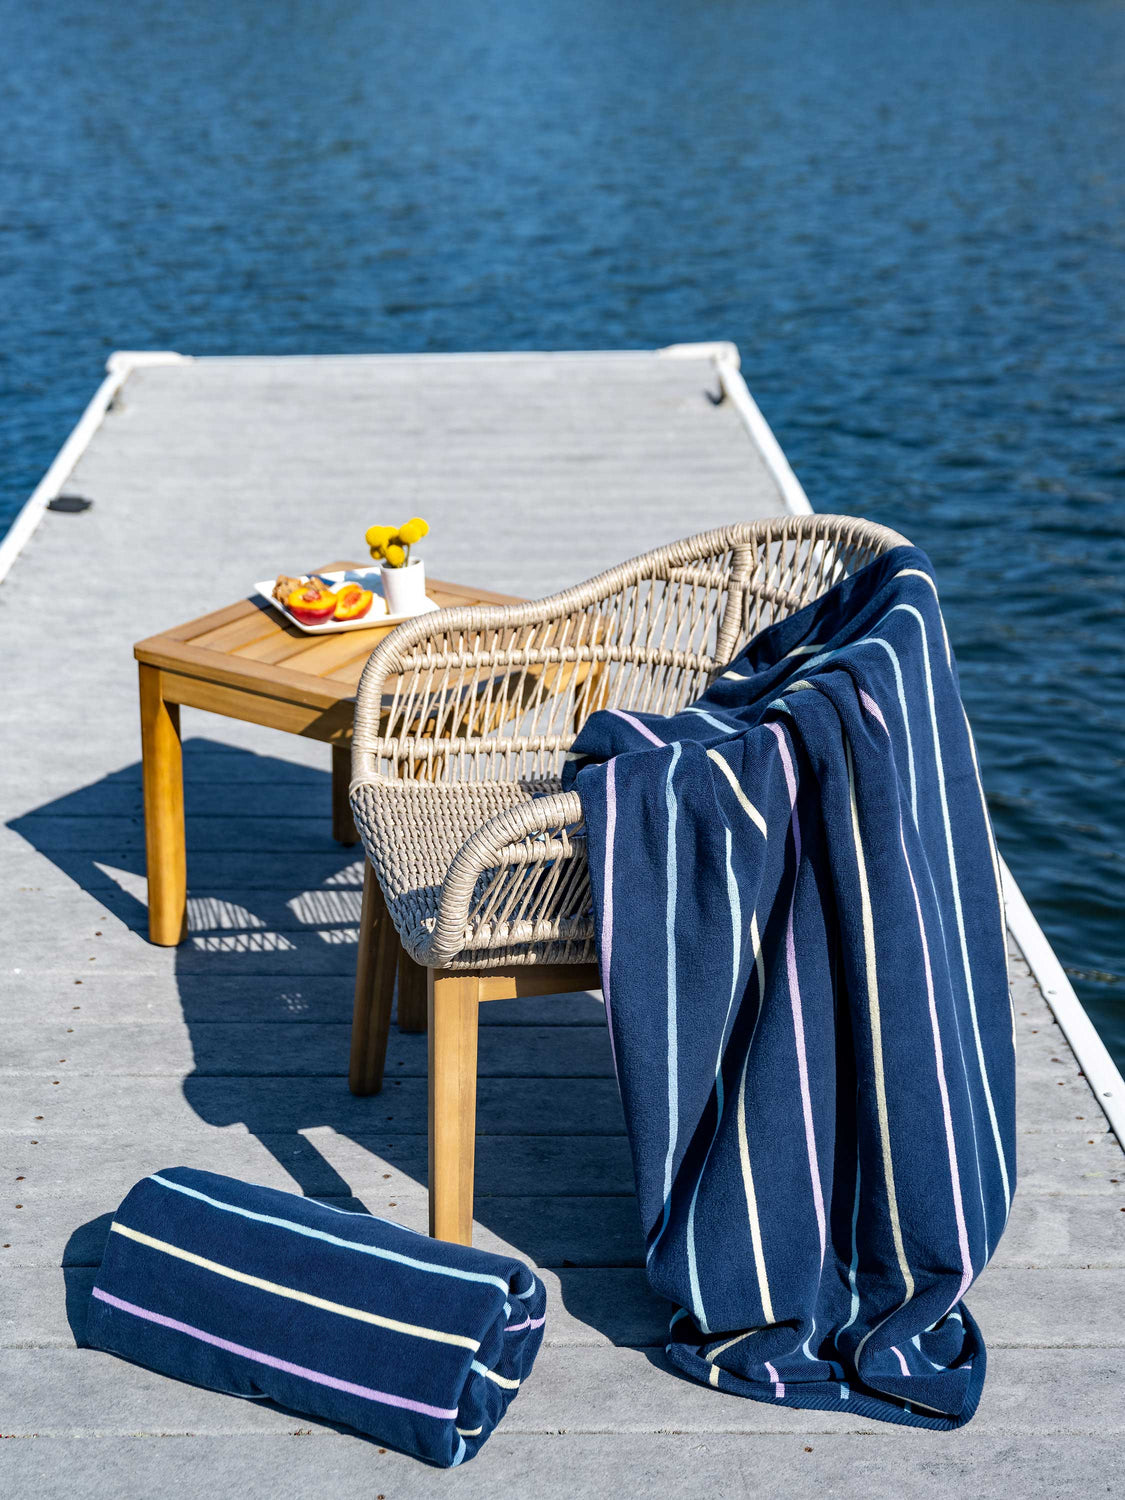 A navy blue, striped towel hanging over a chair in between a table with a plate of fruit and flowers atop it and a rolled-up towel on a dock.